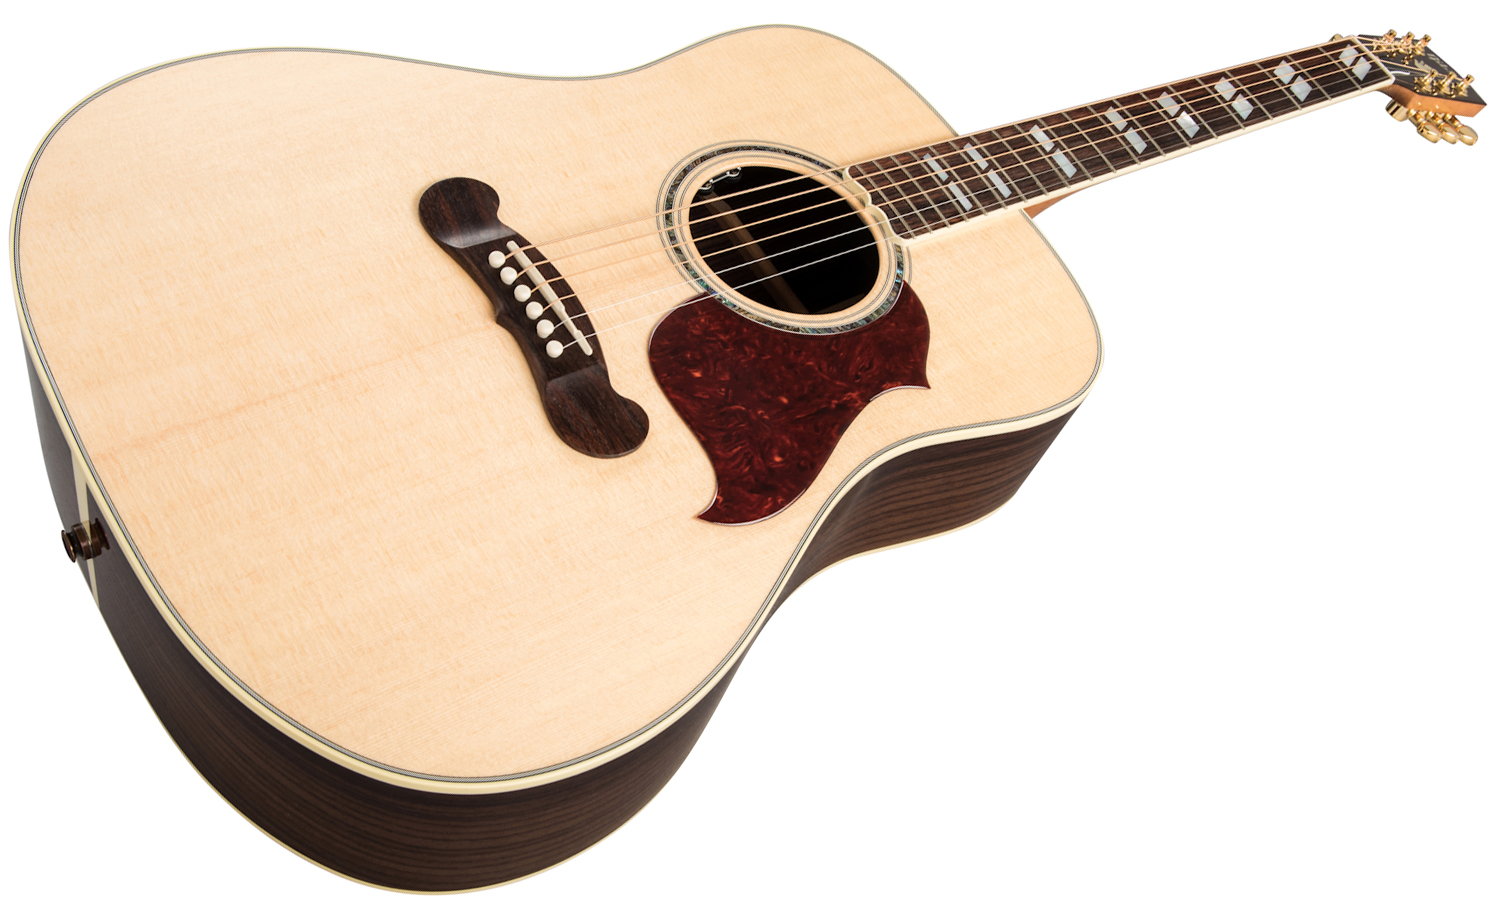 Gibson Songwriter Standard Rosewood 2019 Epicea Palissandre Rw - Antique Natural - Electro acoustic guitar - Variation 3